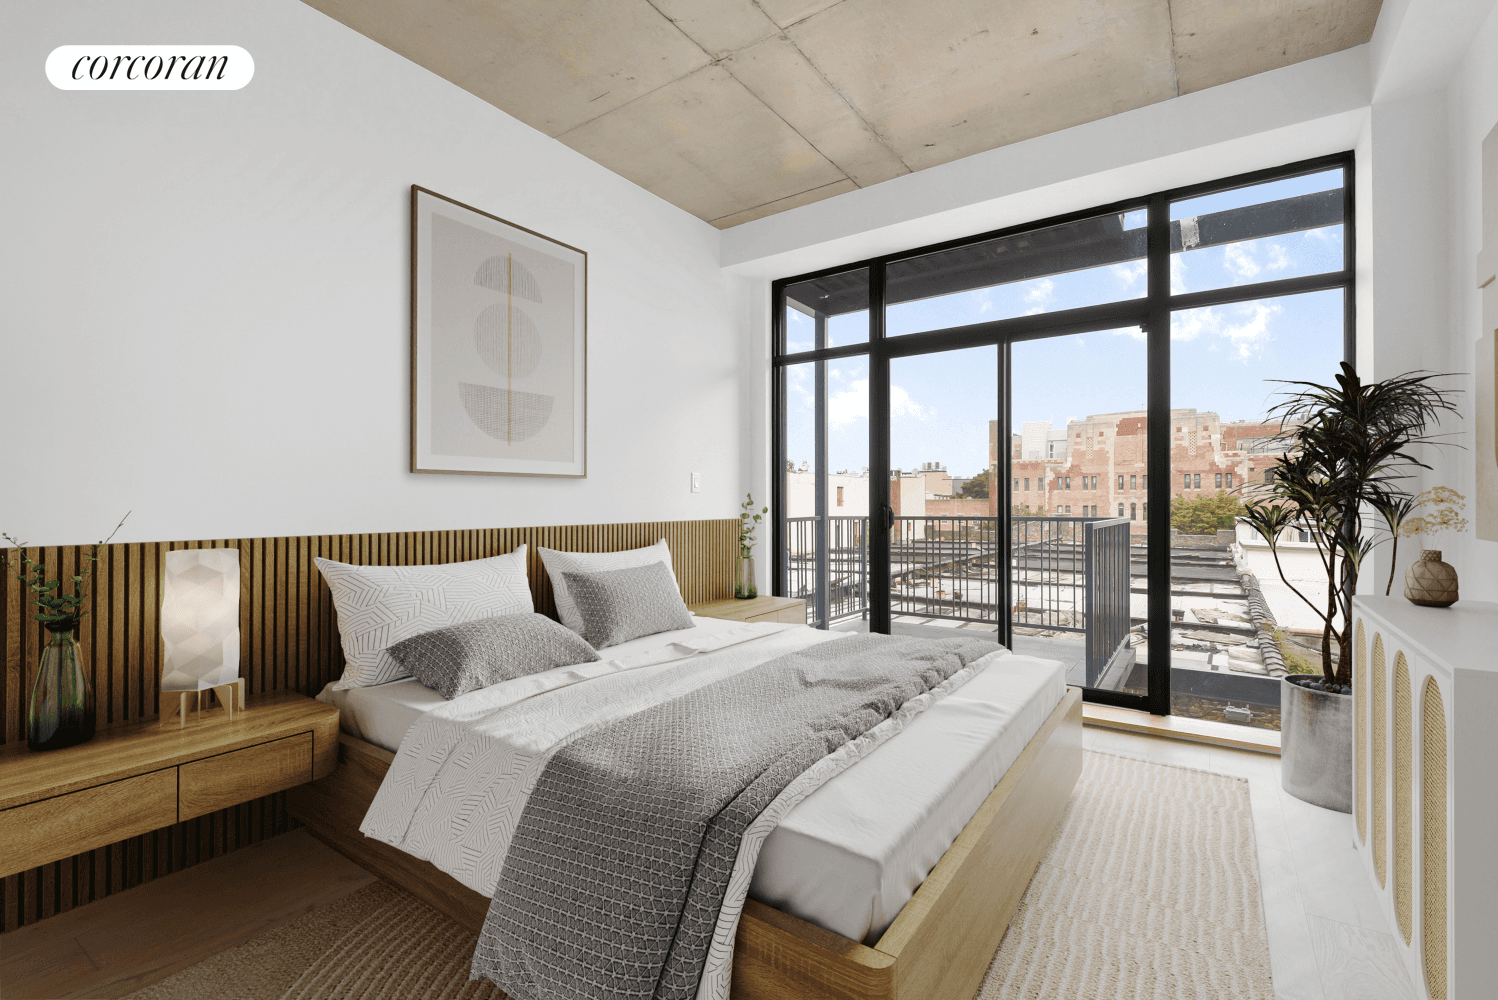 531 Classon Avenue is a brand new, 8 unit boutique new construction condo building offering the best of both worlds modern finishes and industrial vibes in a loft like setting.